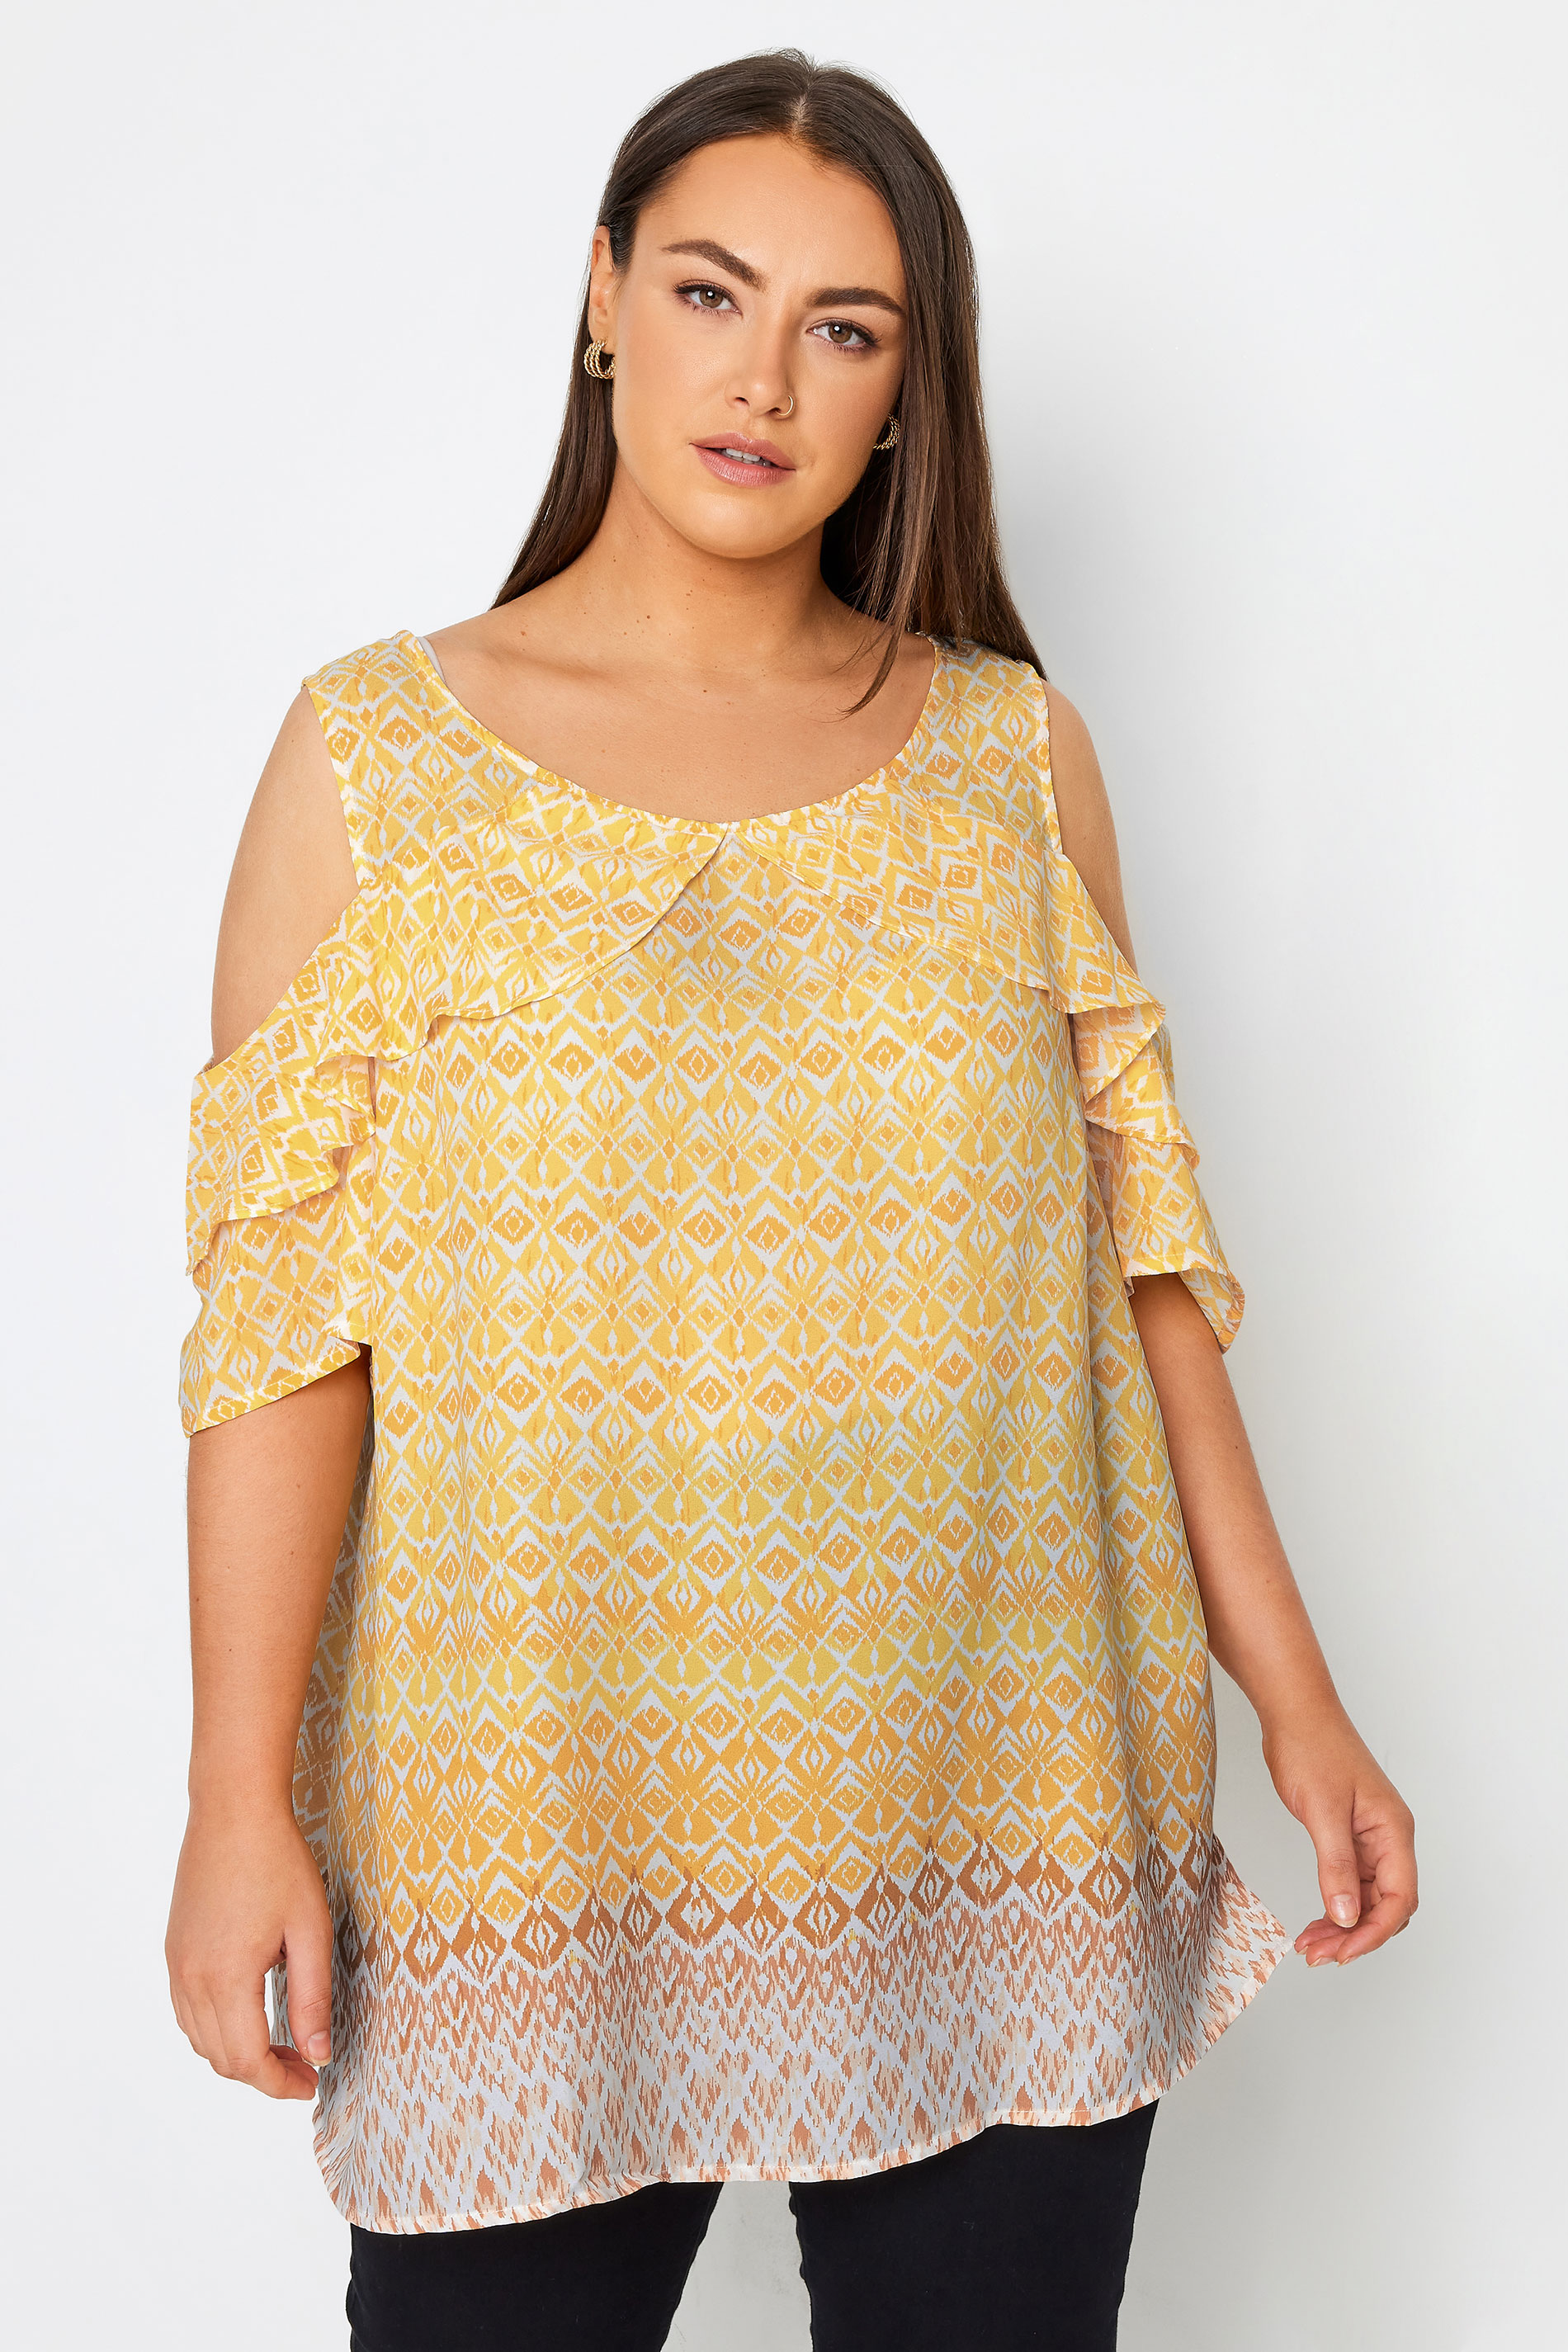 City Chic Yellow Aztec Print Frill Cold Shoulder Top 1